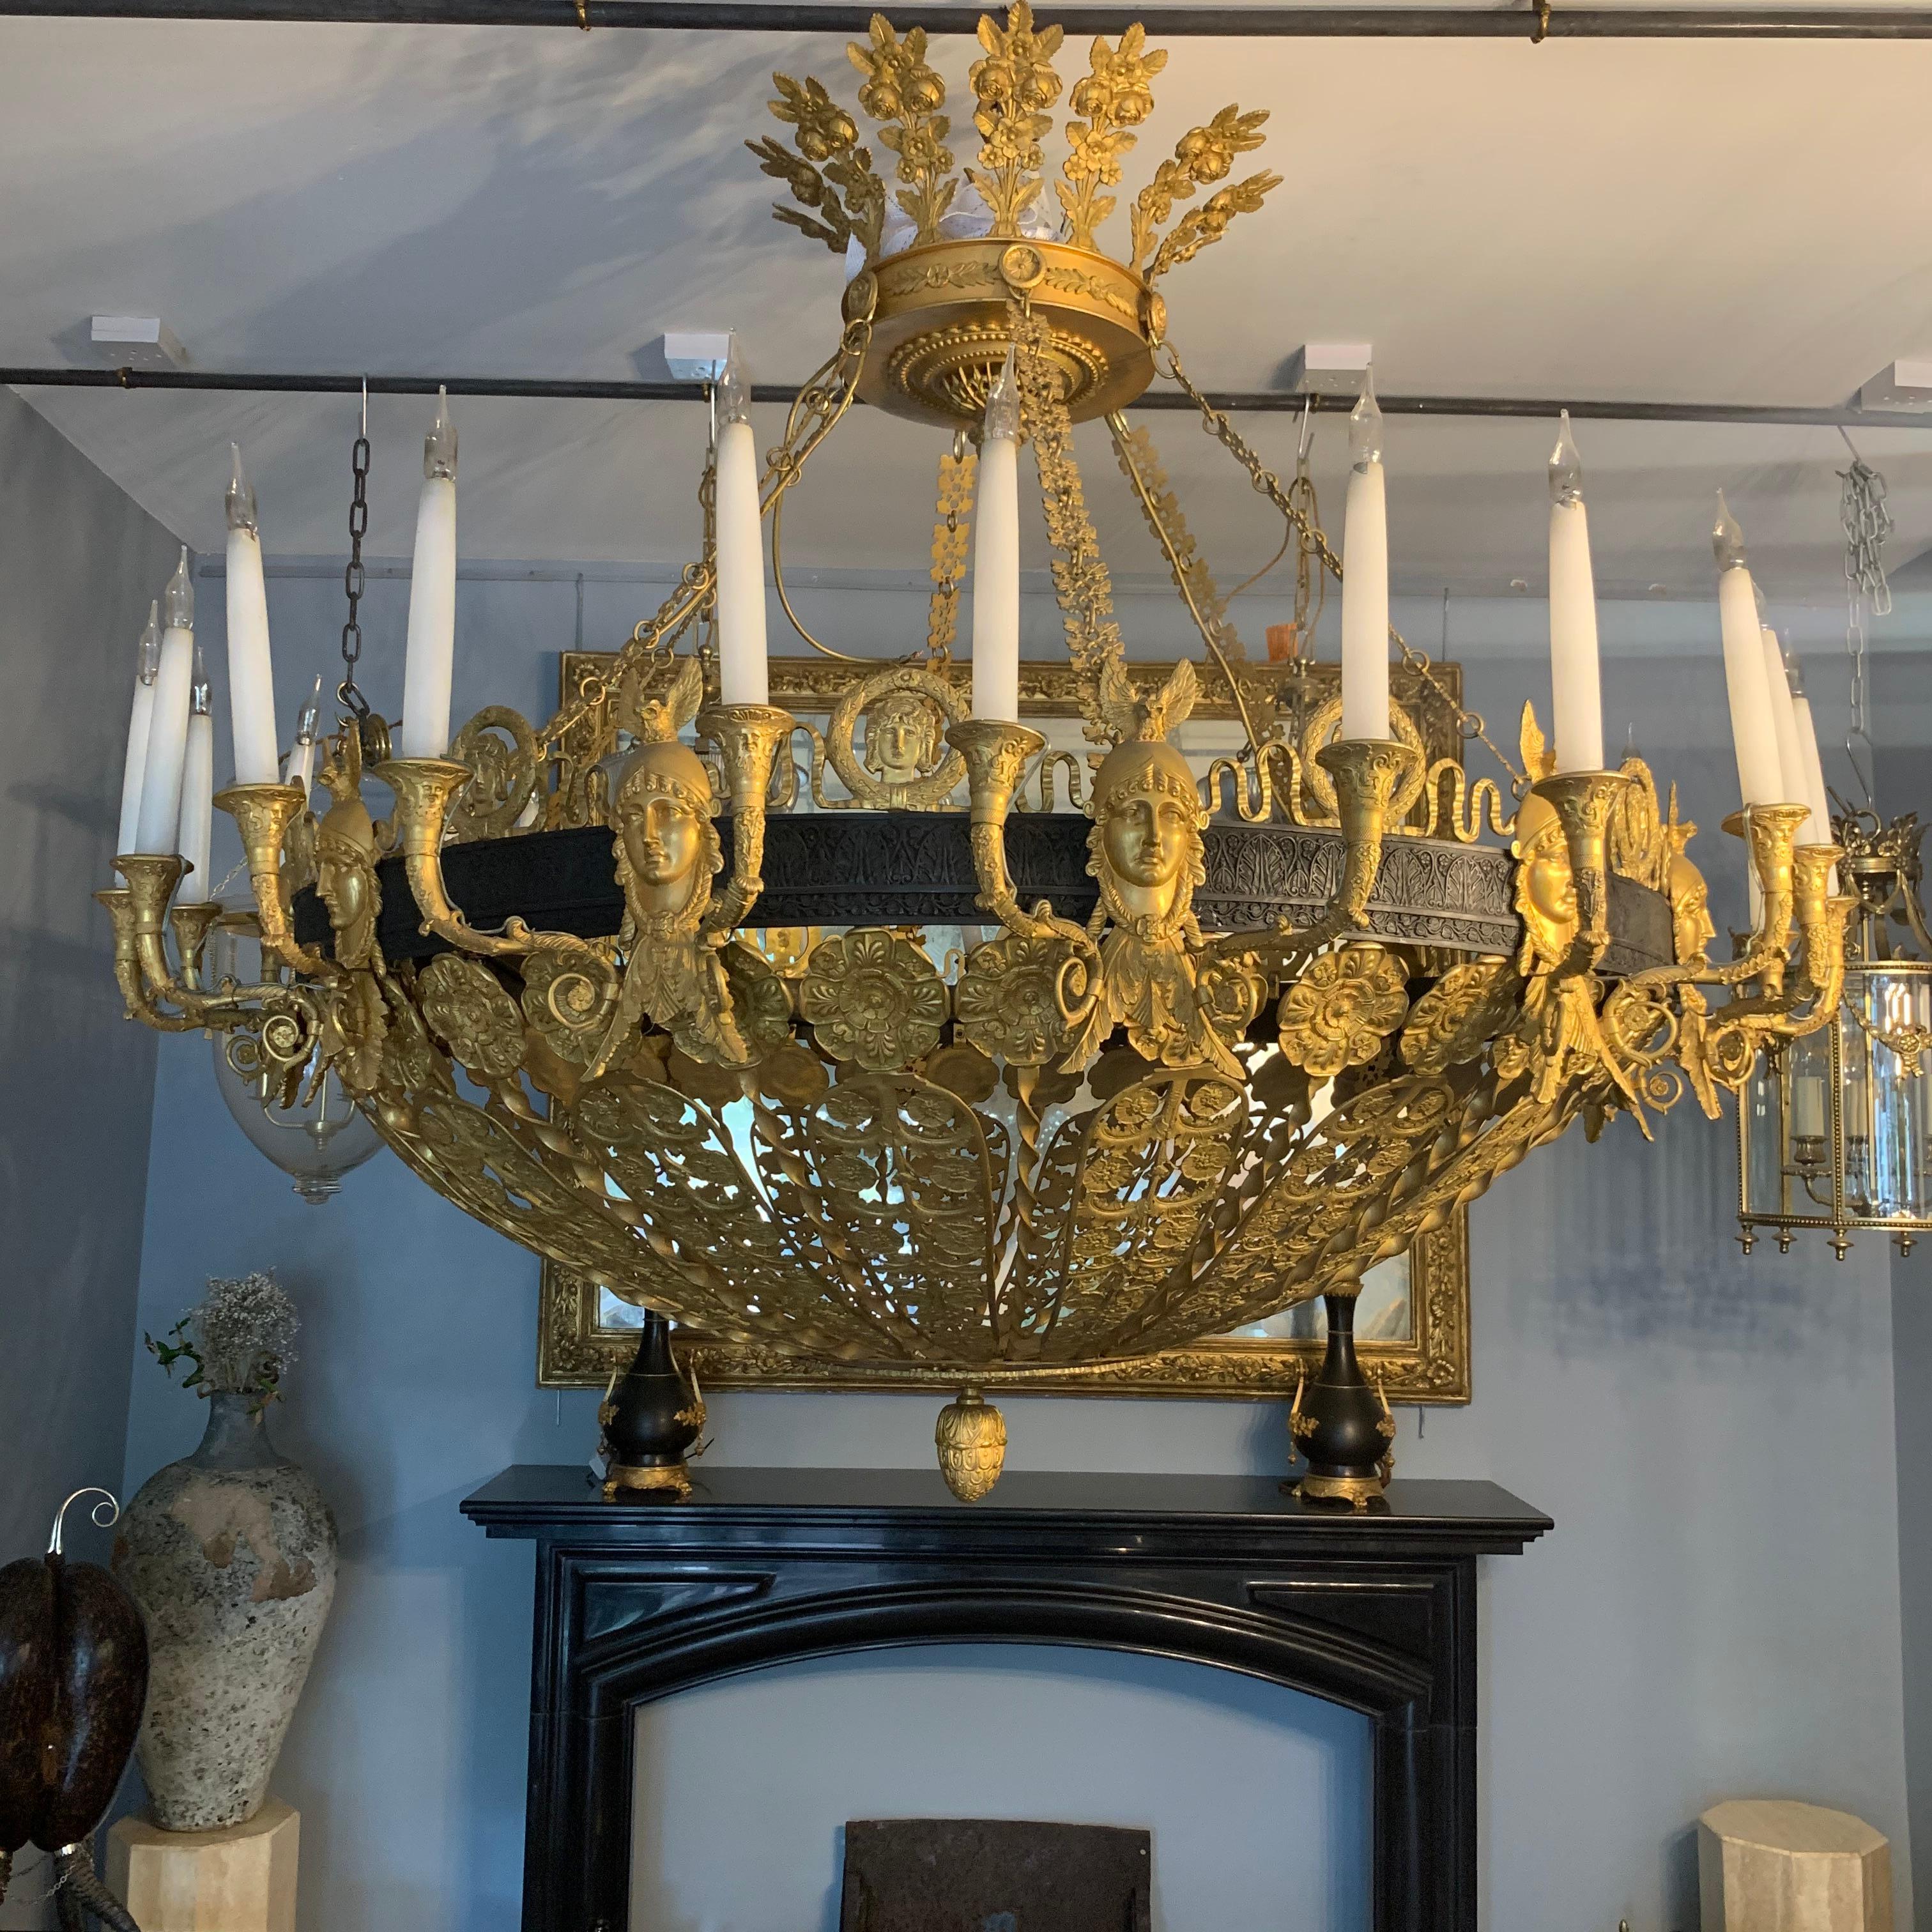 Ormolu and Patinated Bronze Twenty four light Chandelier of pierced dished form, 19th Century, the crown form corona over foliate cast linked chains, suspending a circular pierced dish cast with classical masks and foliate panels.

This light was